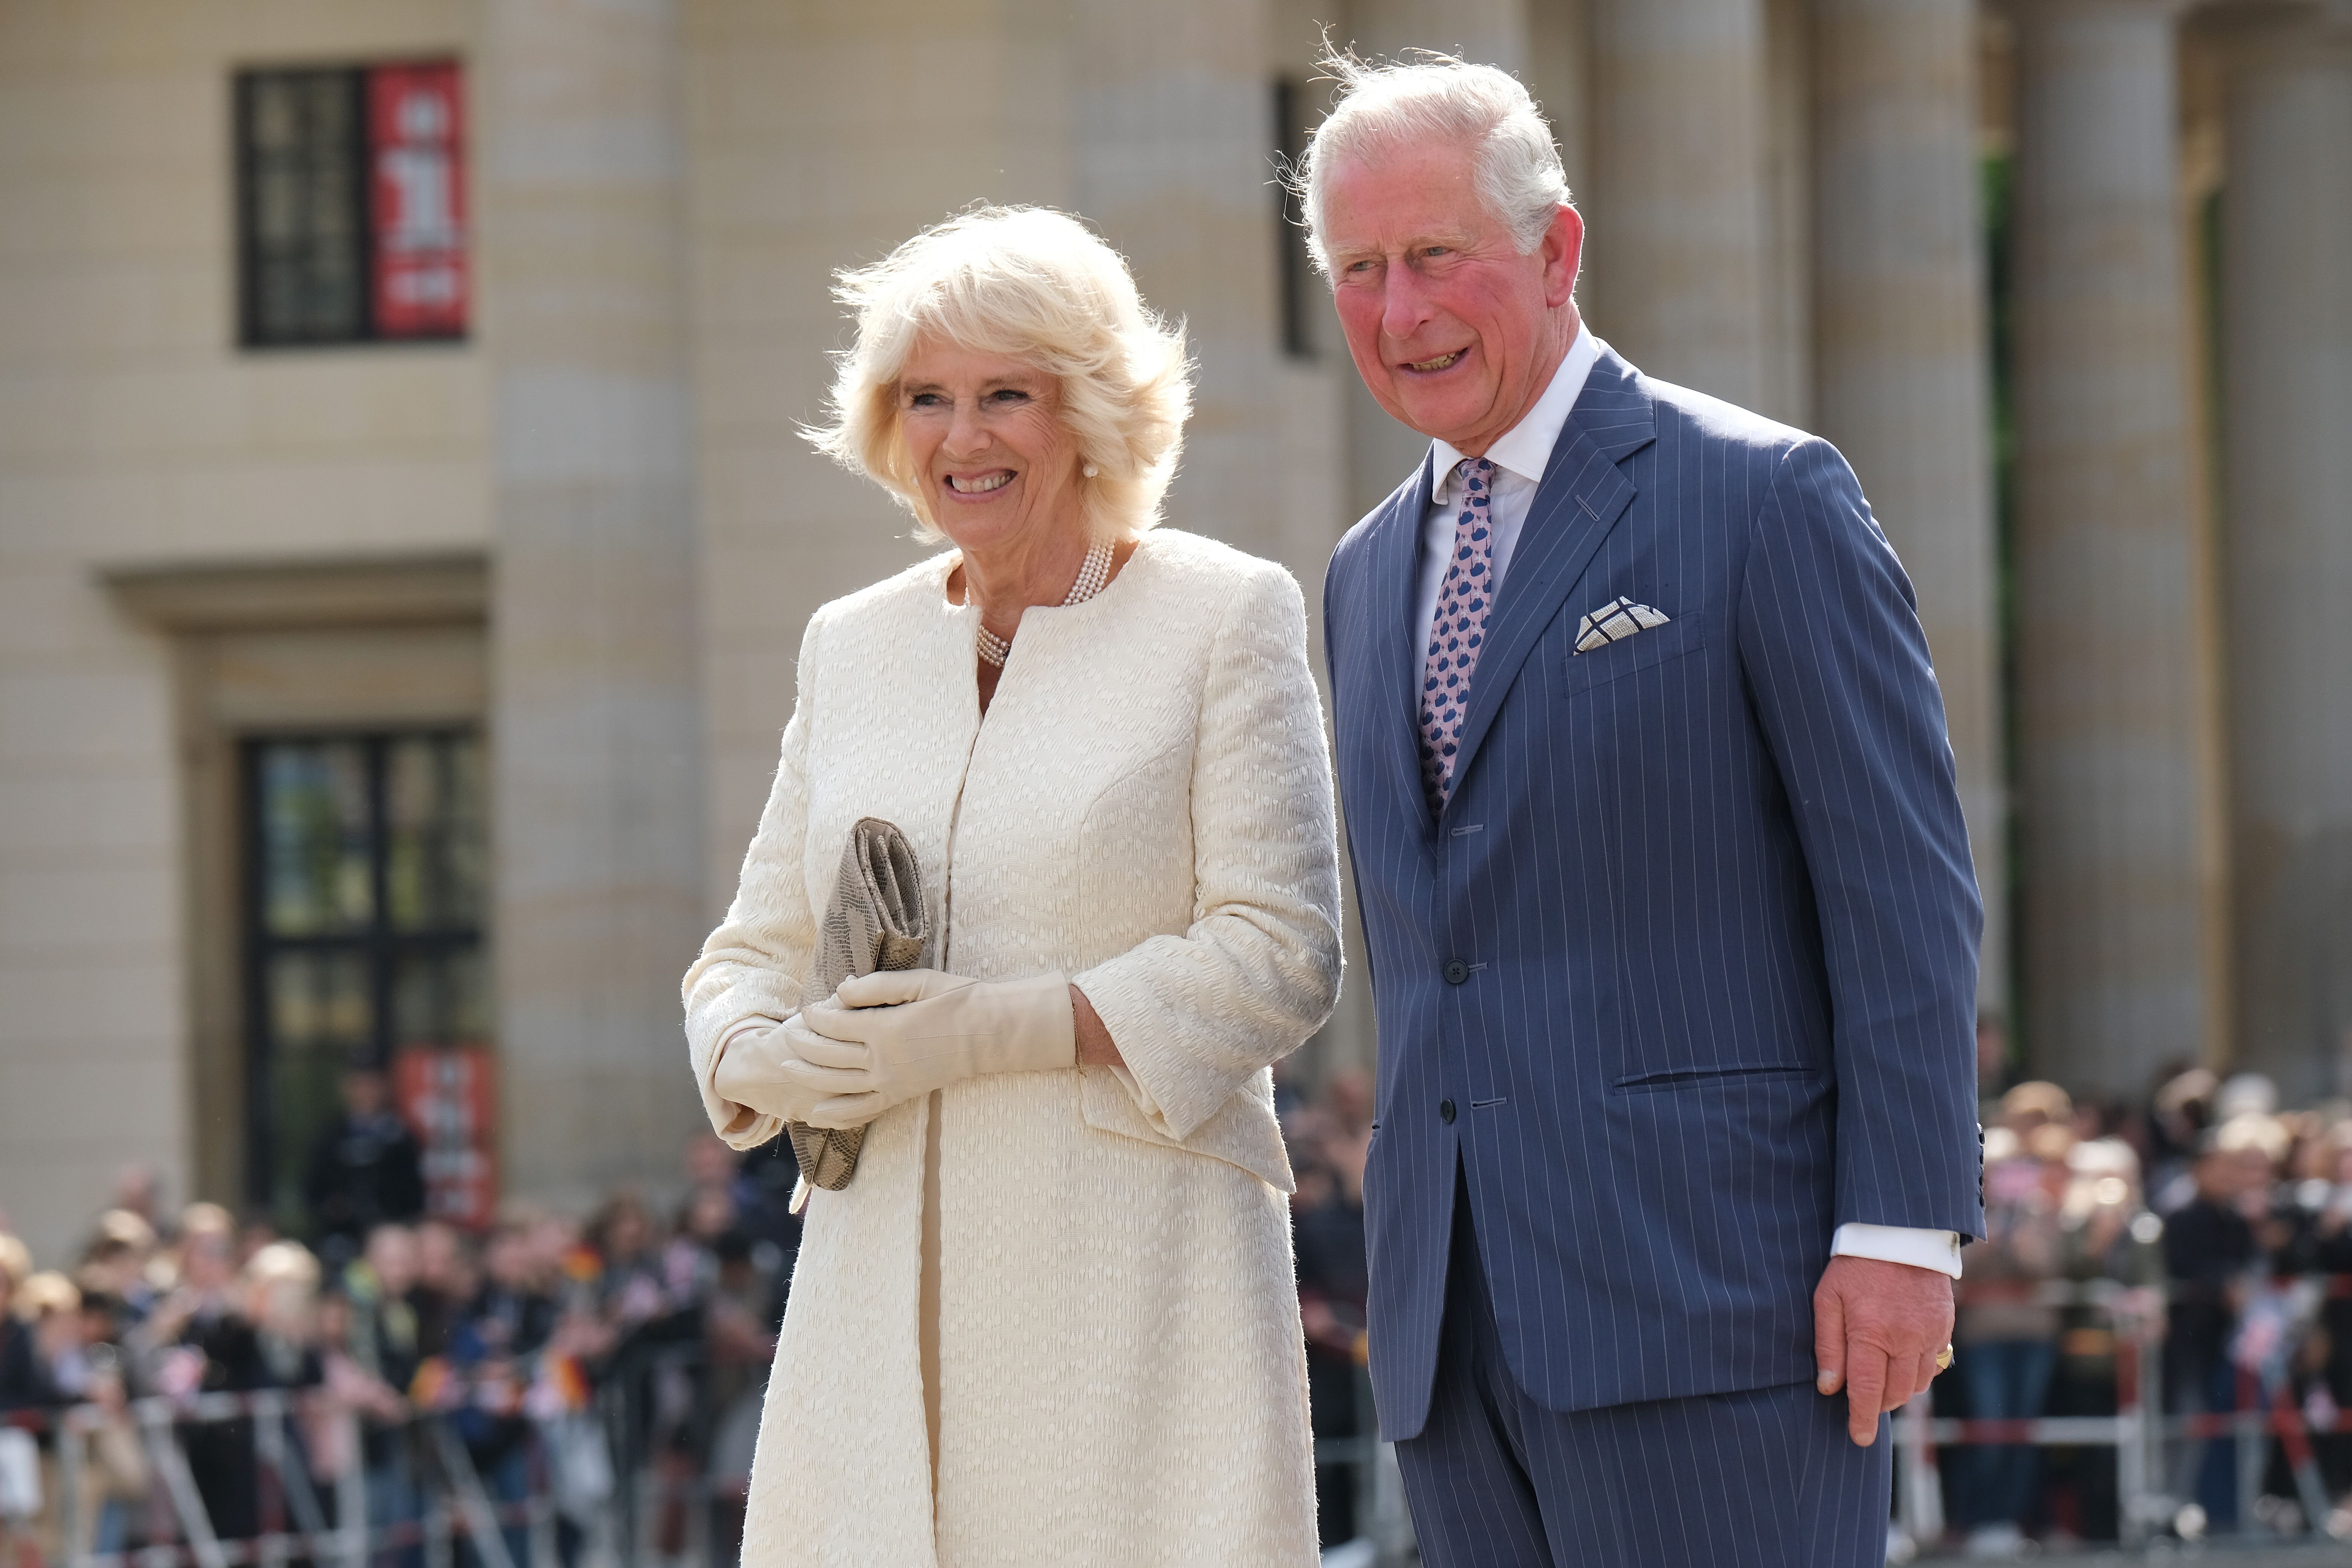 Camilla, Duchess of Cornwall and Prince Charles, Prince of Wales pause for photographers. | Source: Getty Images